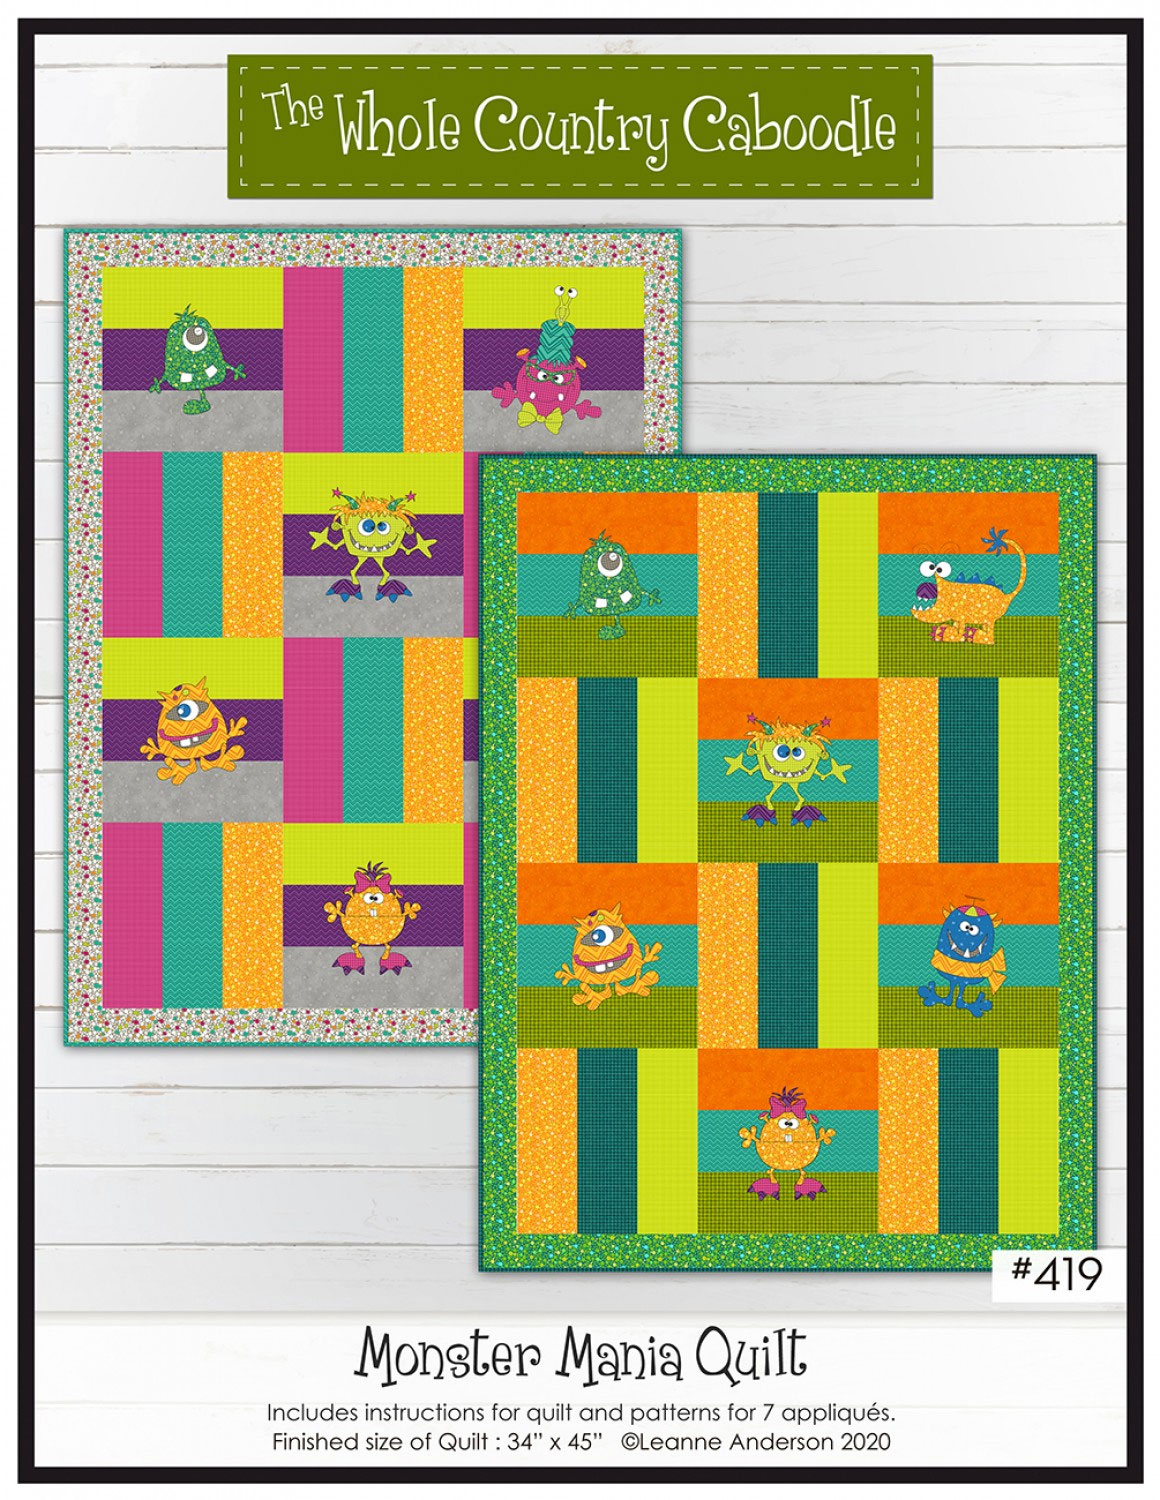 Monster-Mania-quilt-sewing-pattern-The-Whole-Country-Caboodle-front